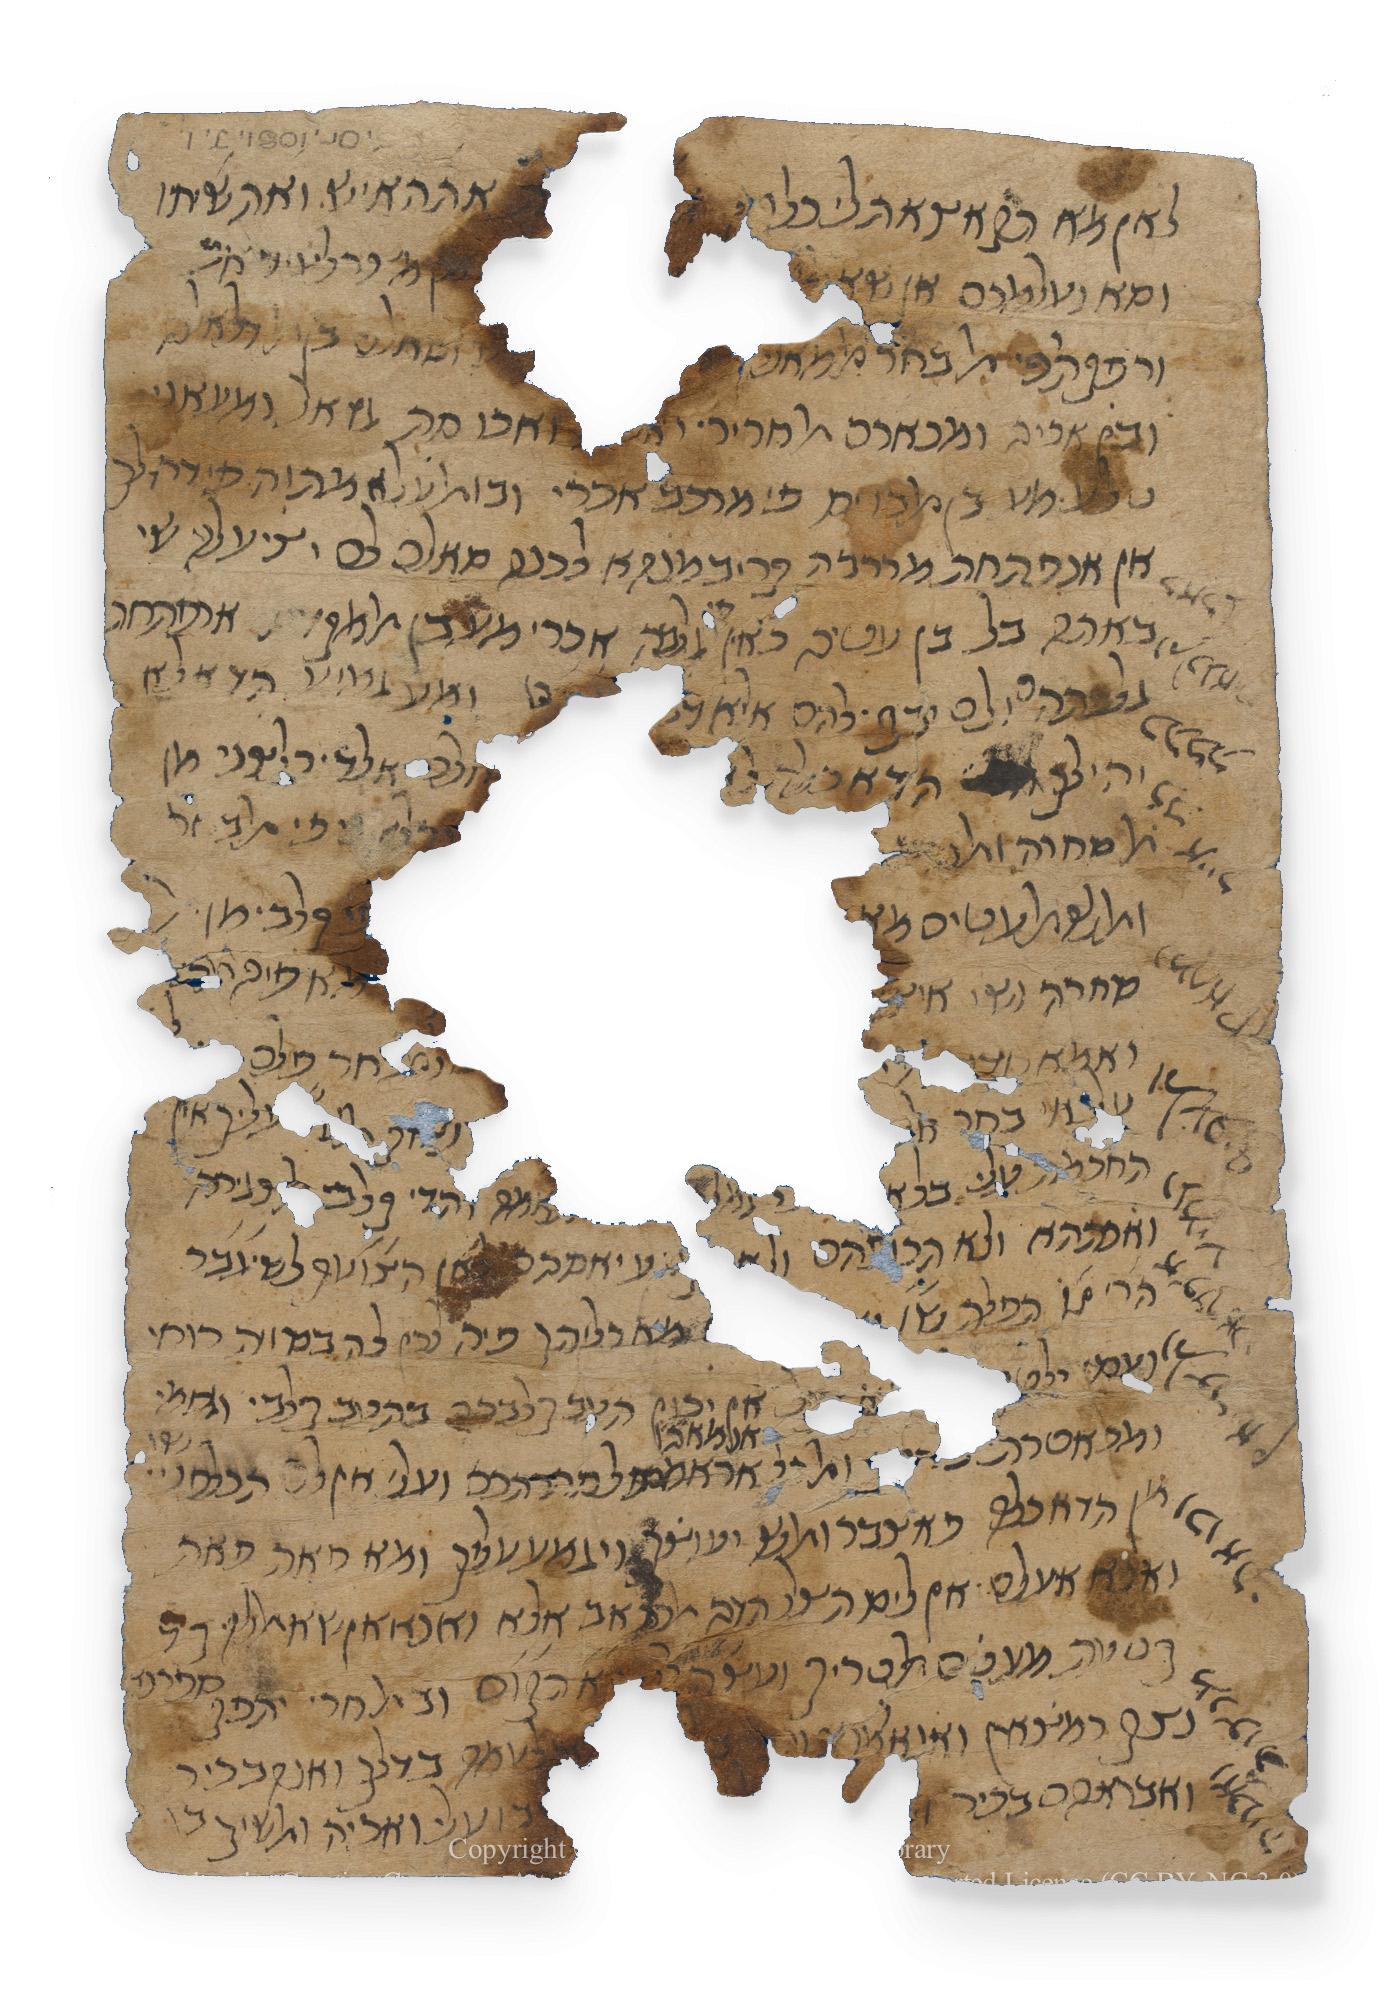 A tattered letter written in 1170. This manuscript is the last letter to Jewish philosopher Moses Maimonides from his brother David, written in 1170.